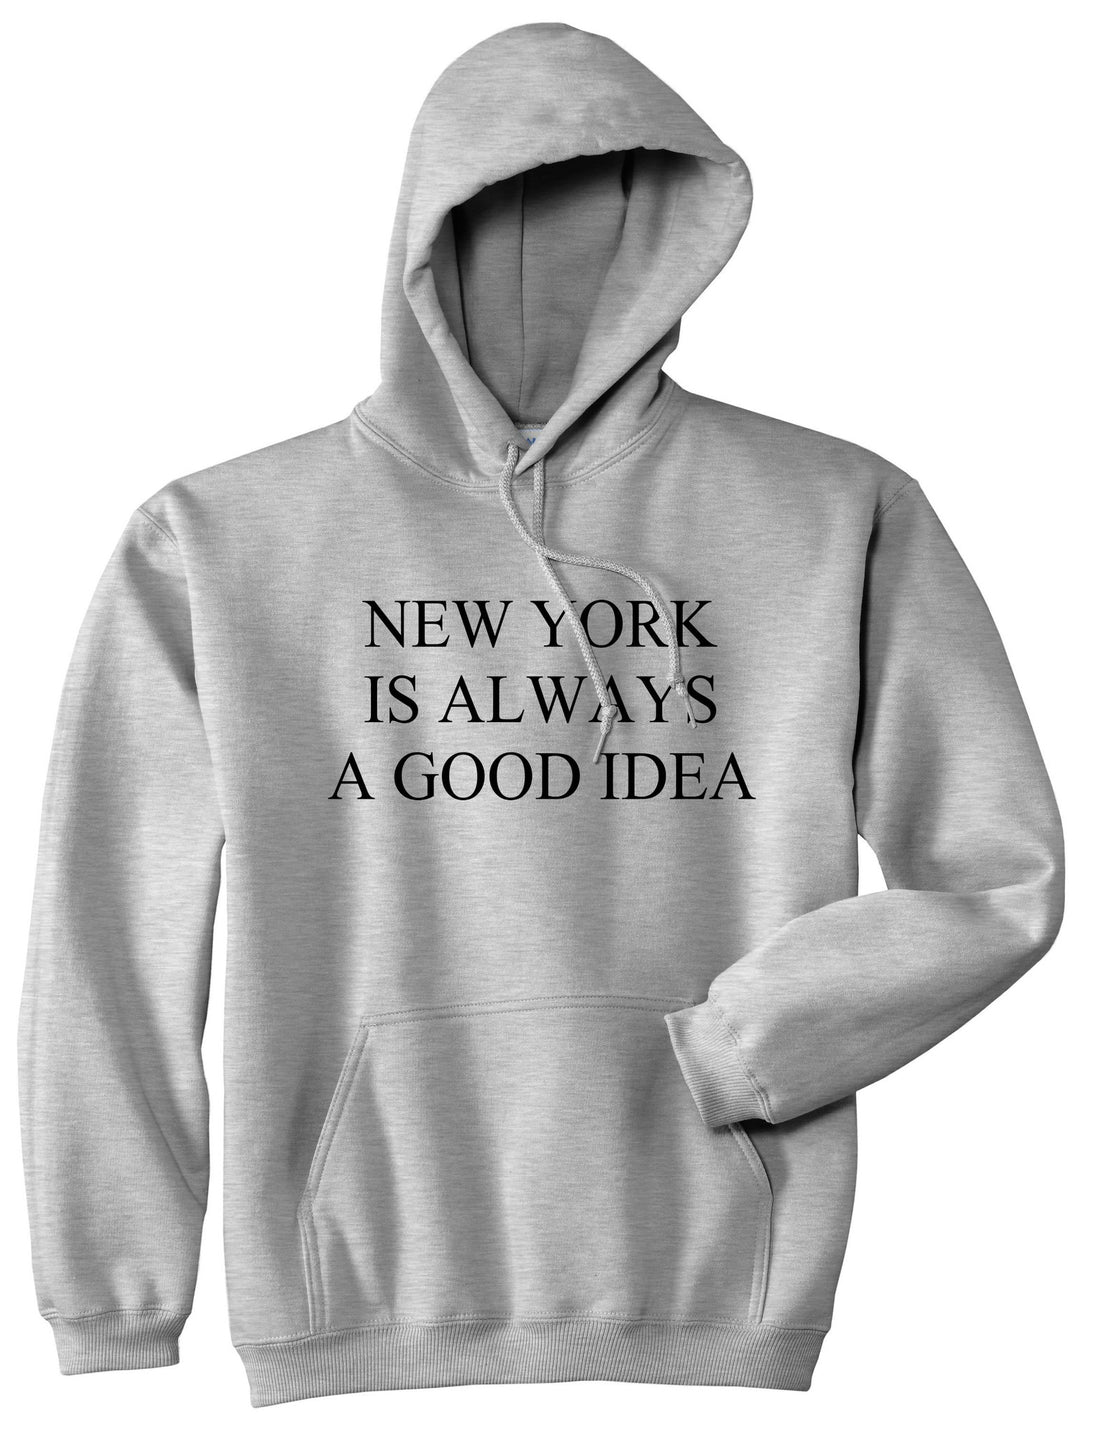 New York Is Always A Good Idea Pullover Hoodie Hoody in Grey by Kings Of NY